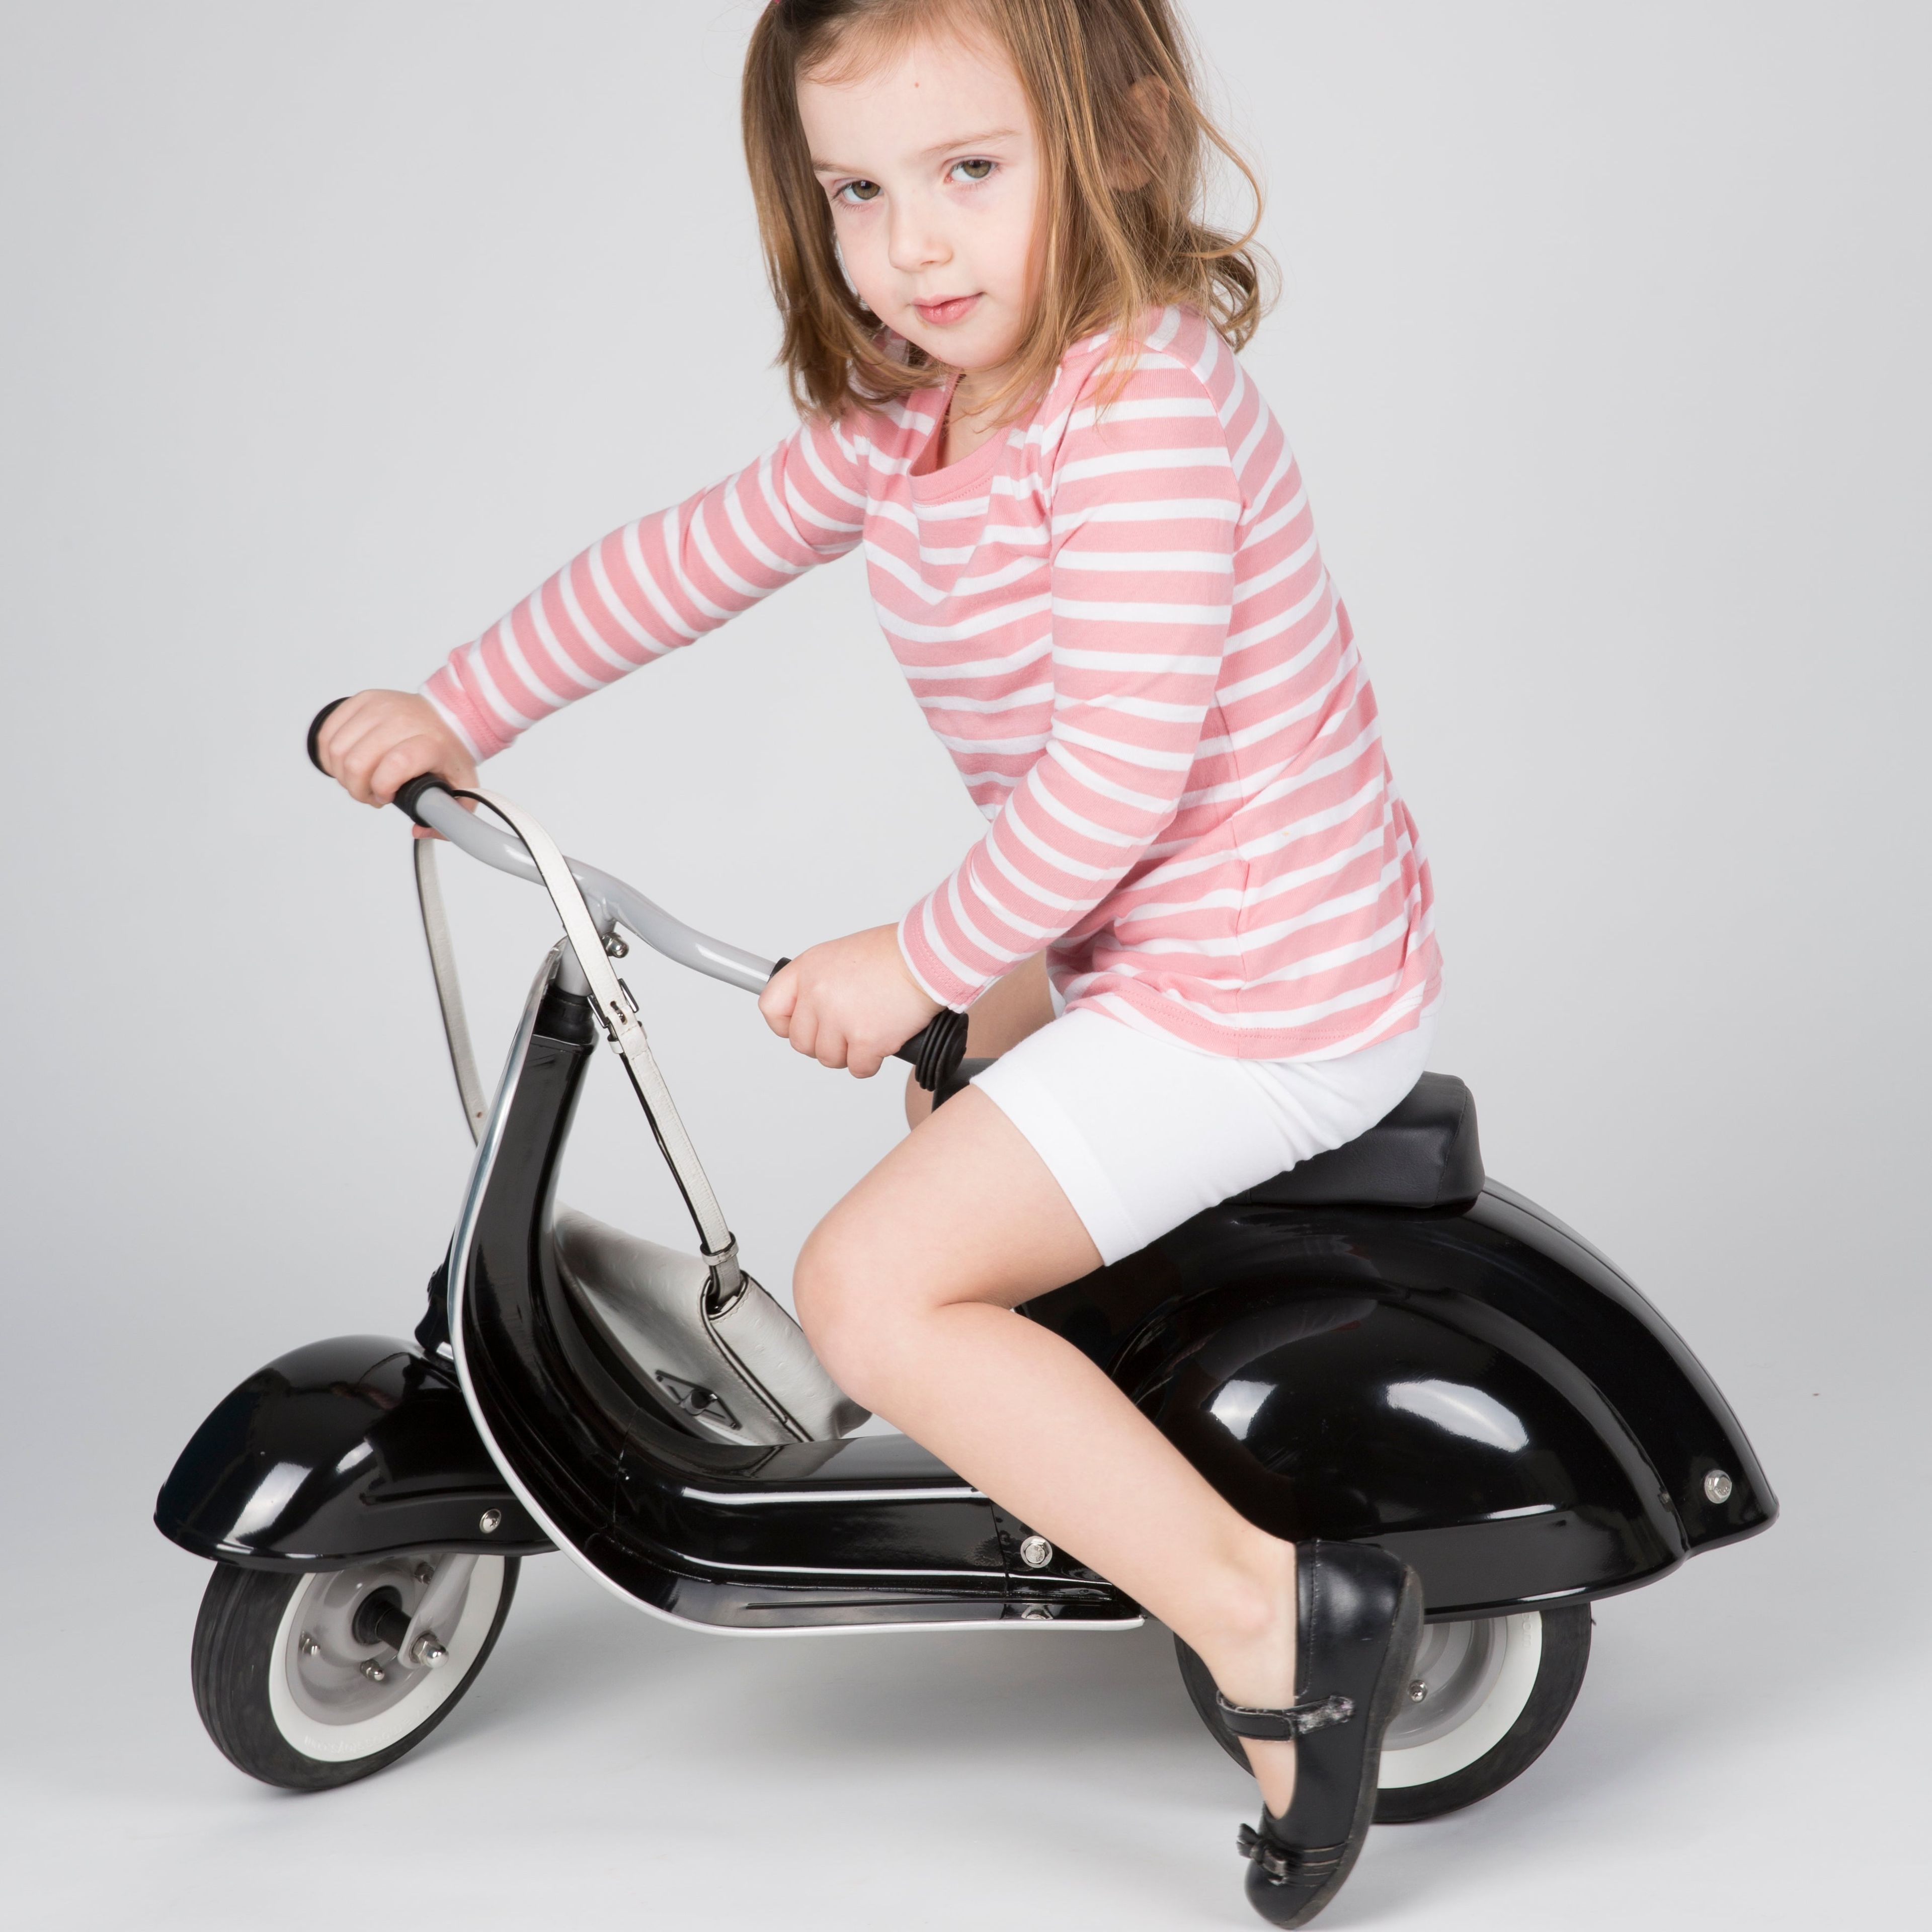 PRIMO Ride On Kids Toy Special (Black)